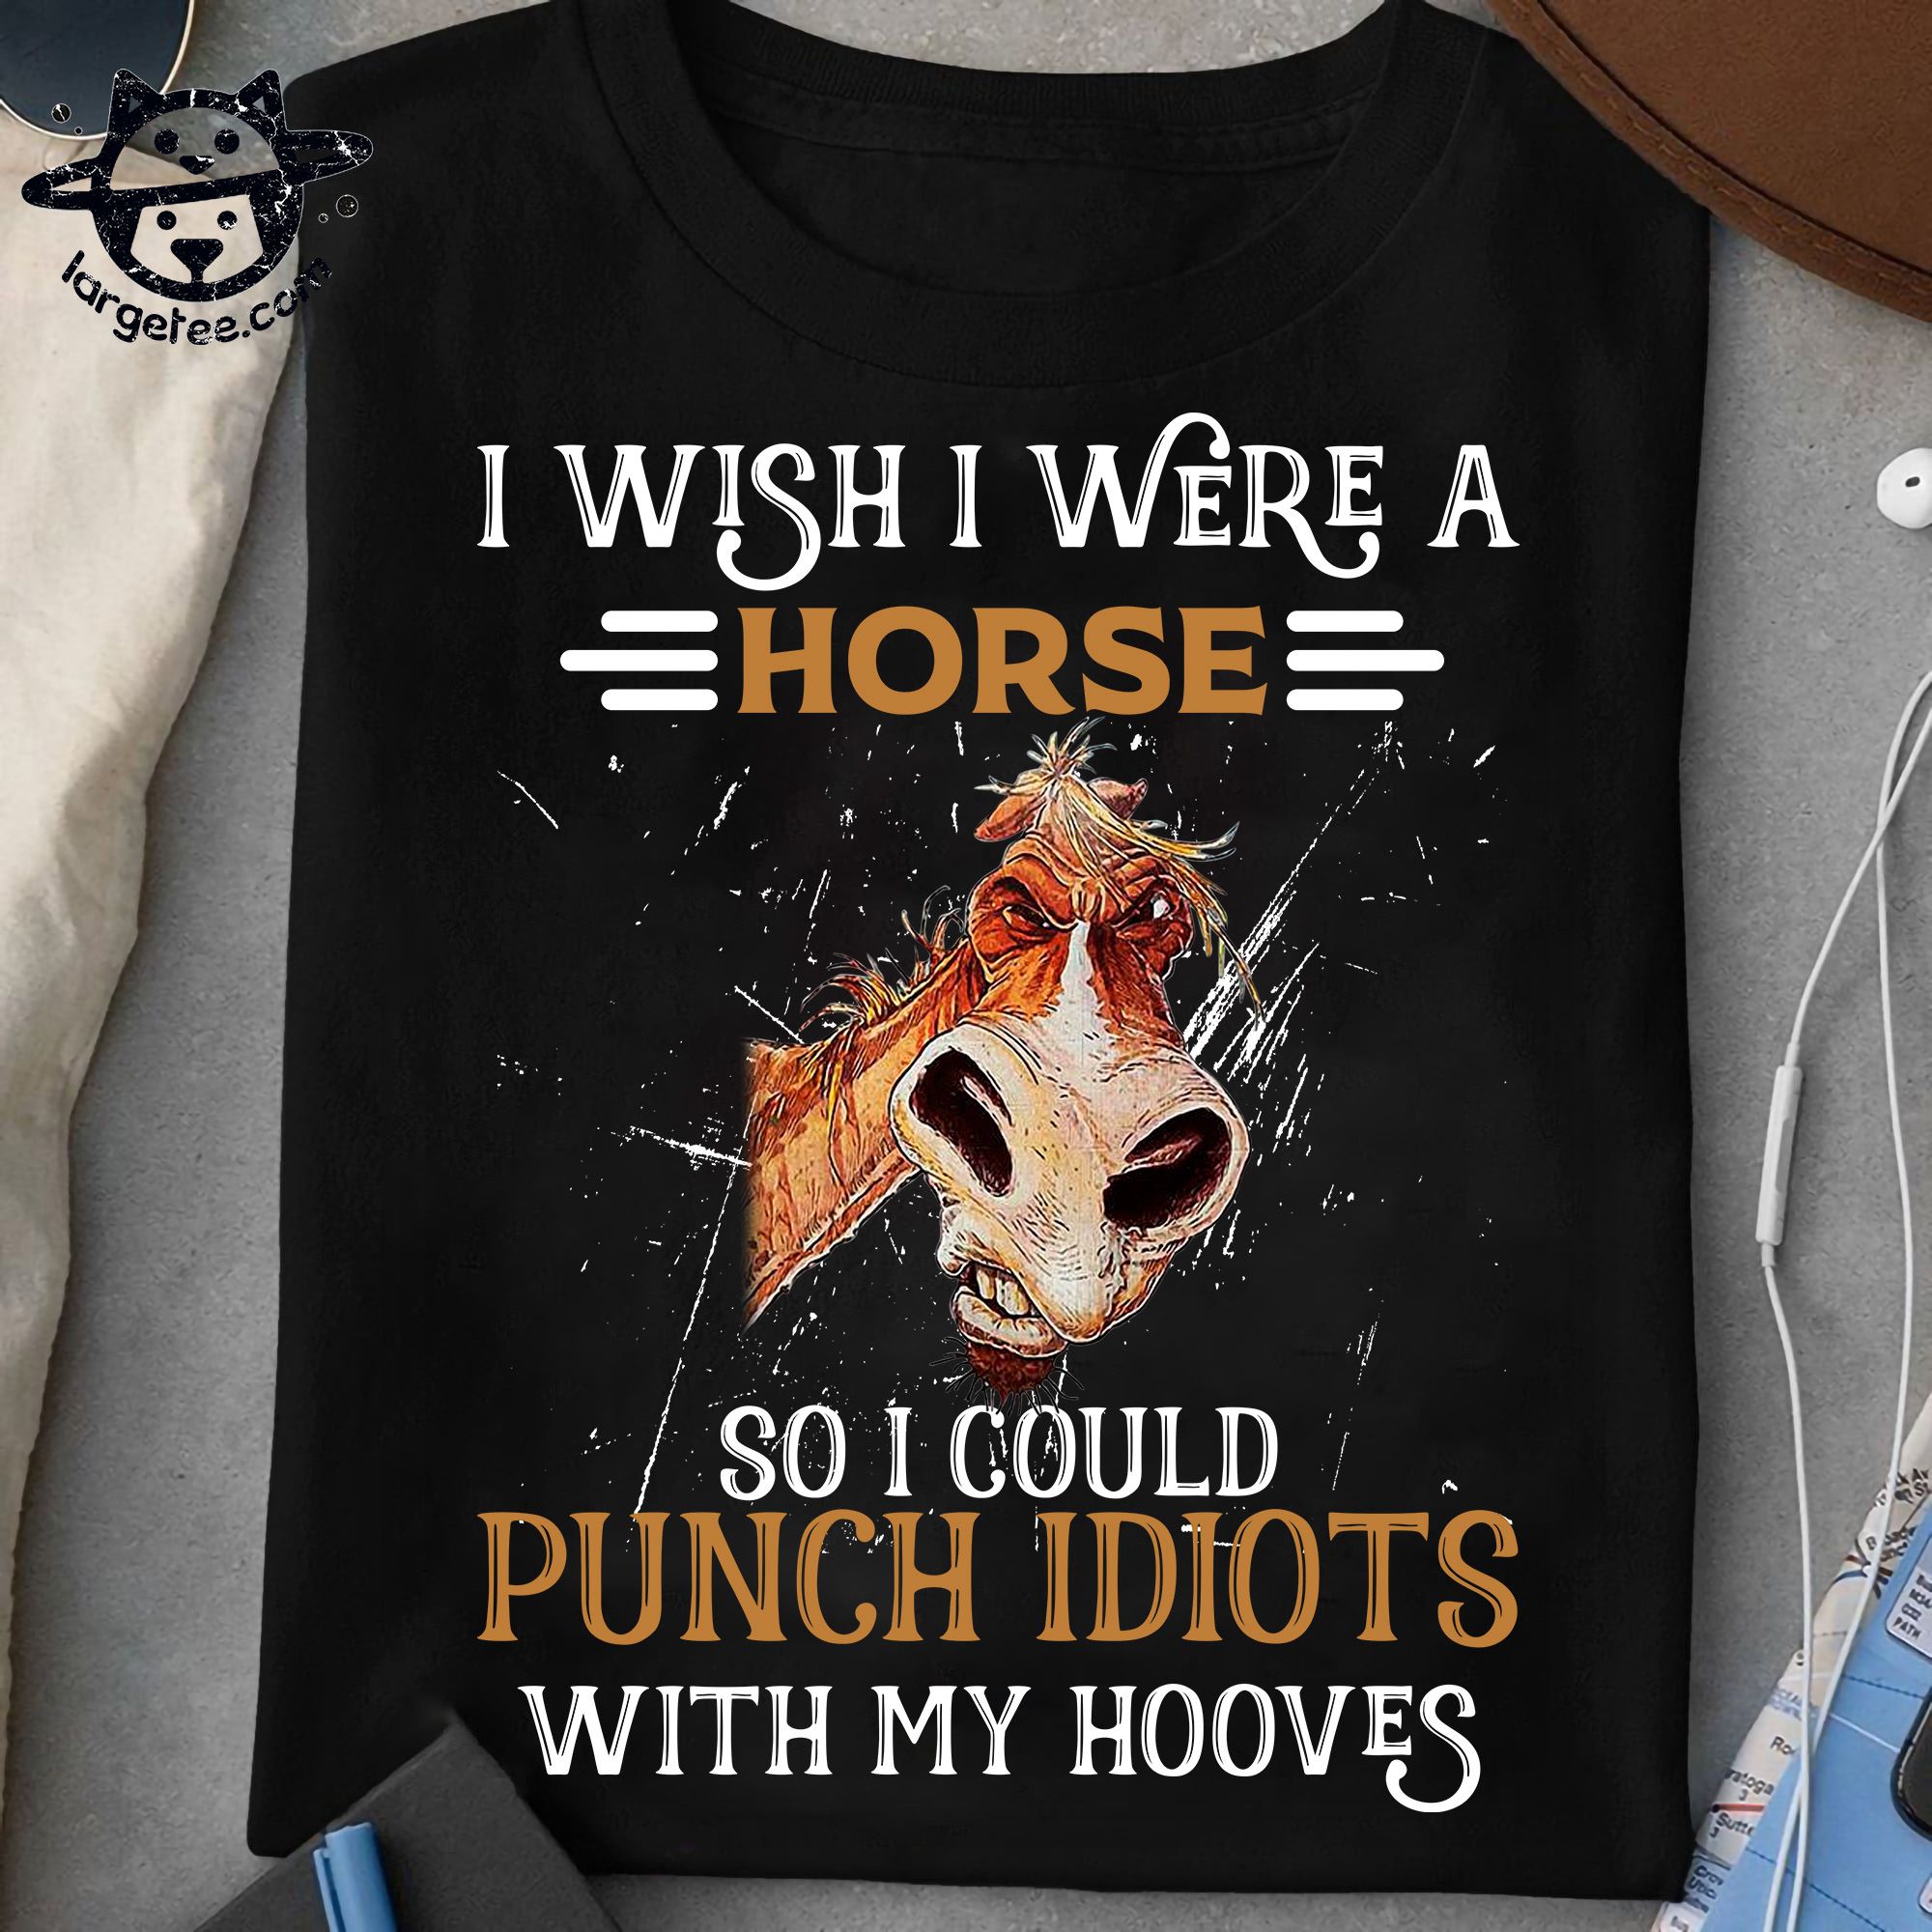 I wish I were a horse so I could punch idiots with my hooves - Grumpy horse